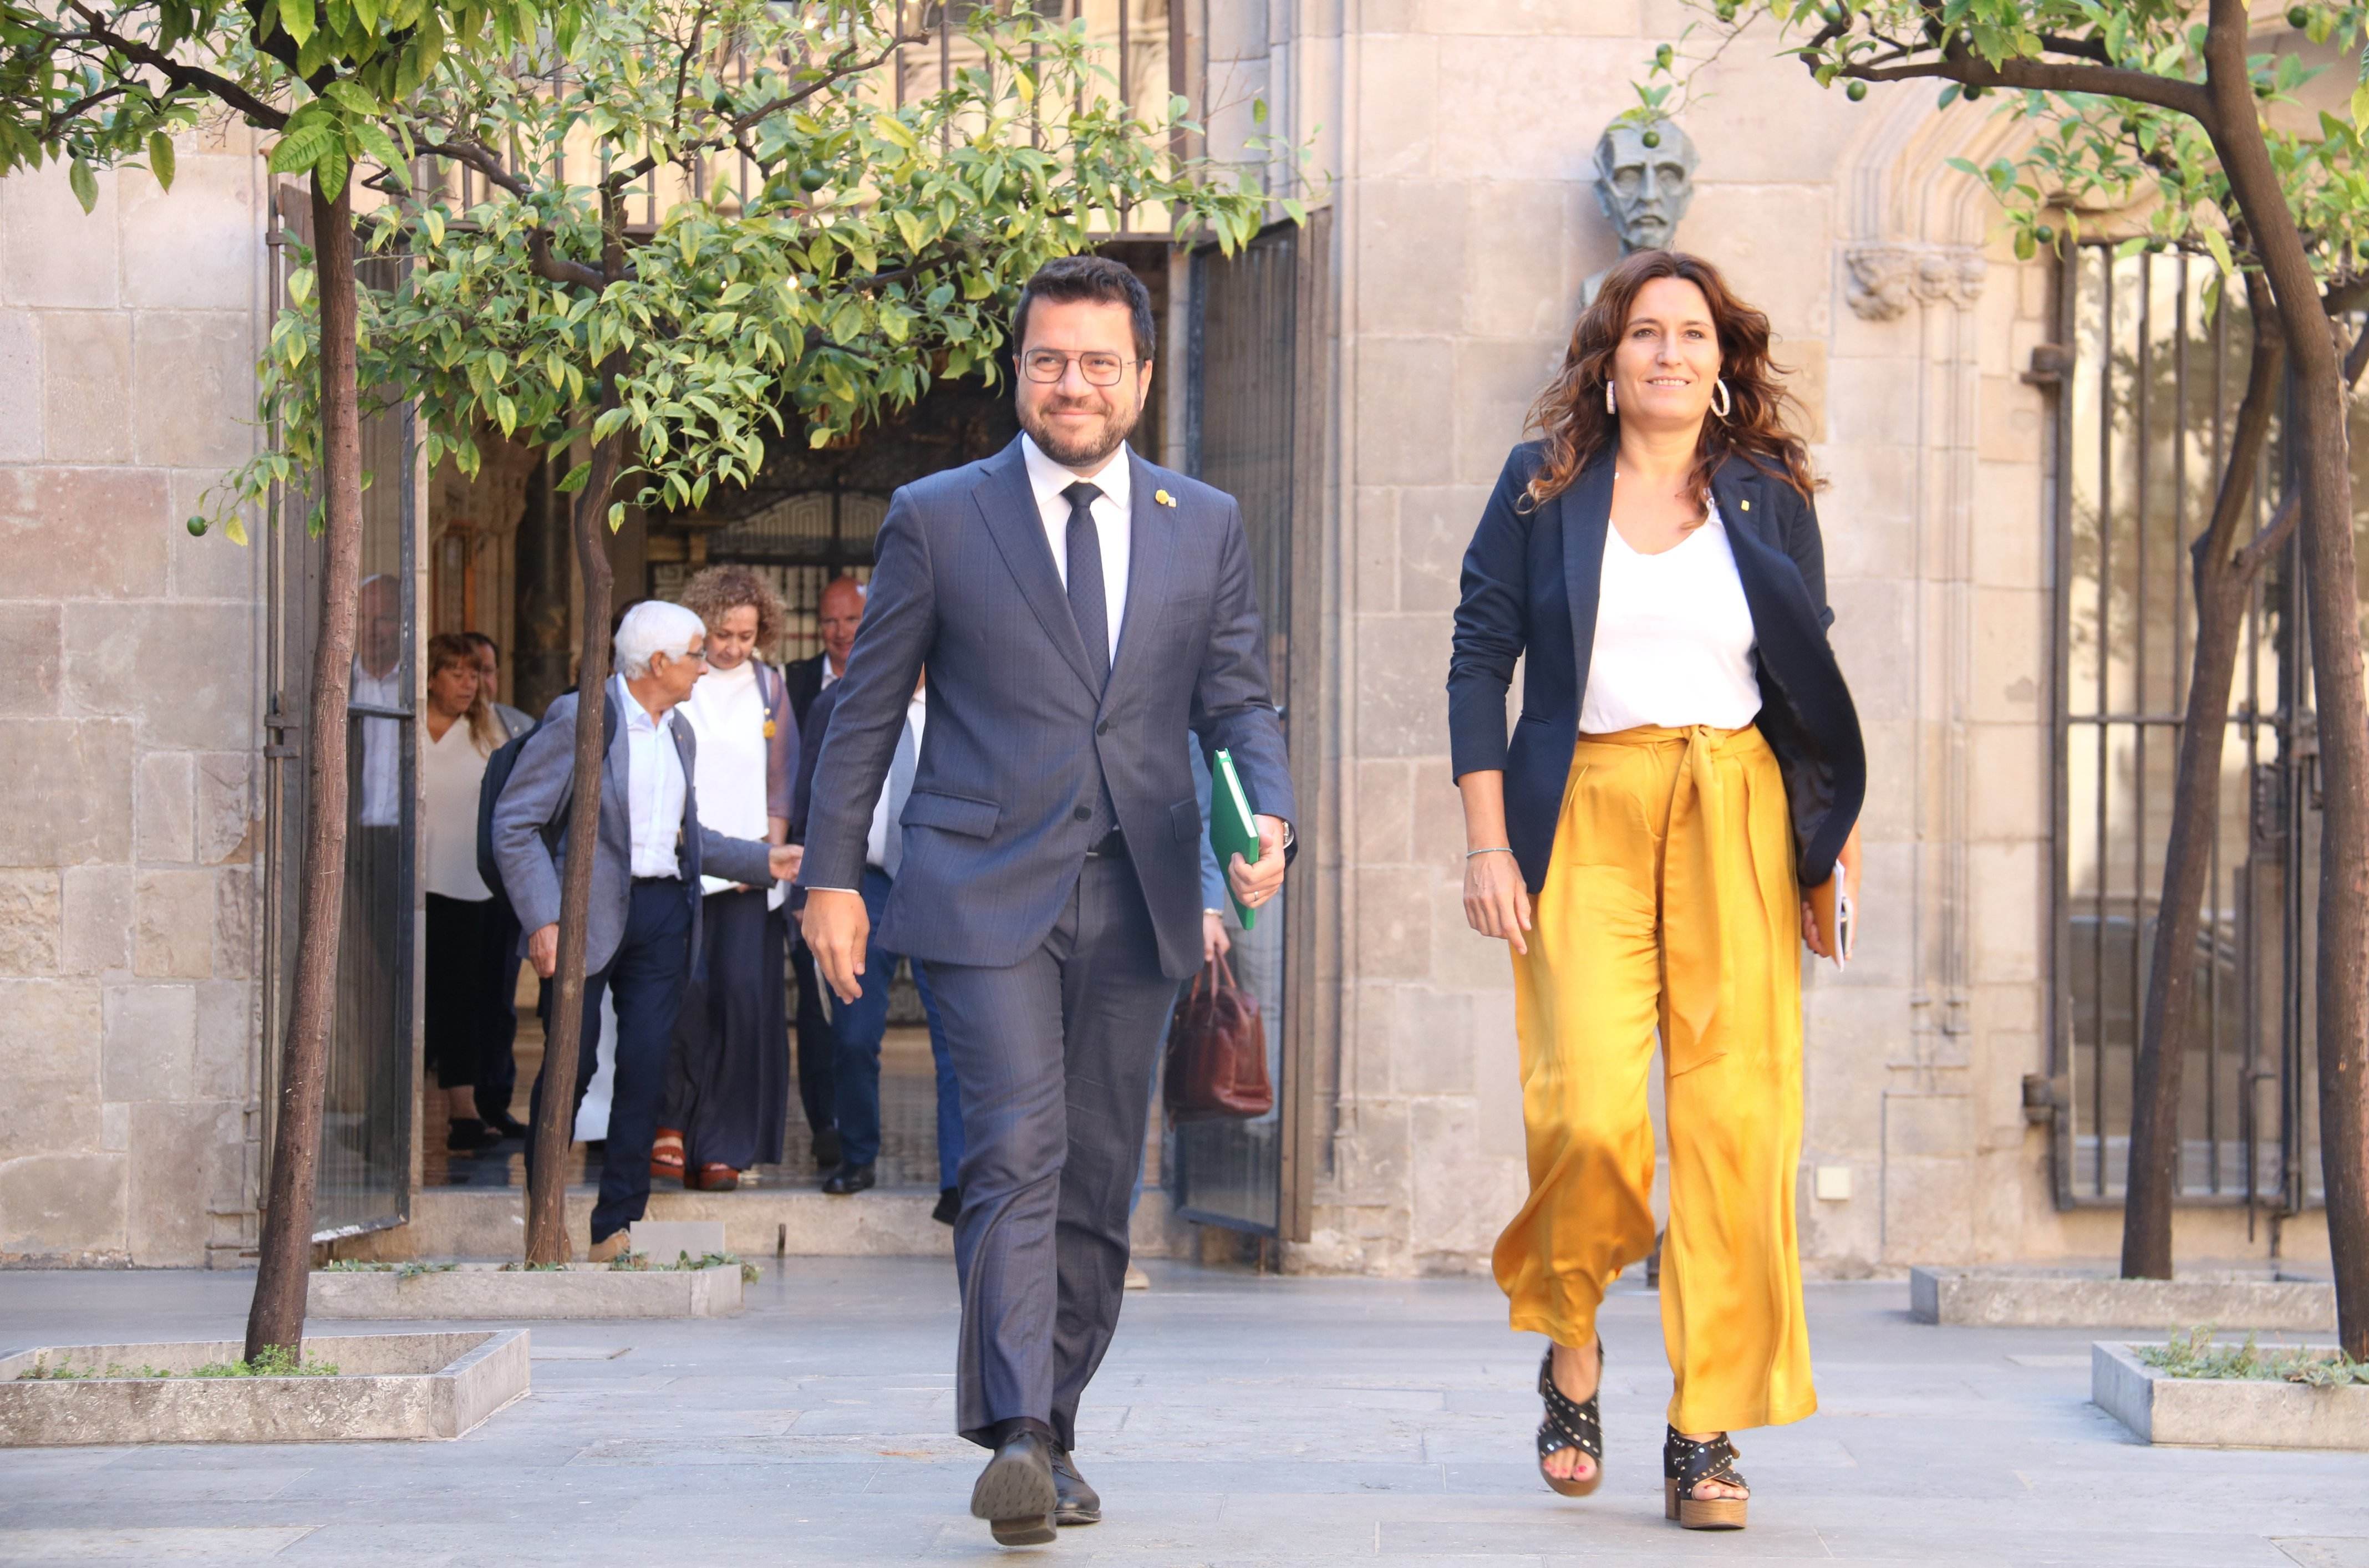 Catalan government will take part in Diada 2023 rally, but Aragonès's presence is uncertain